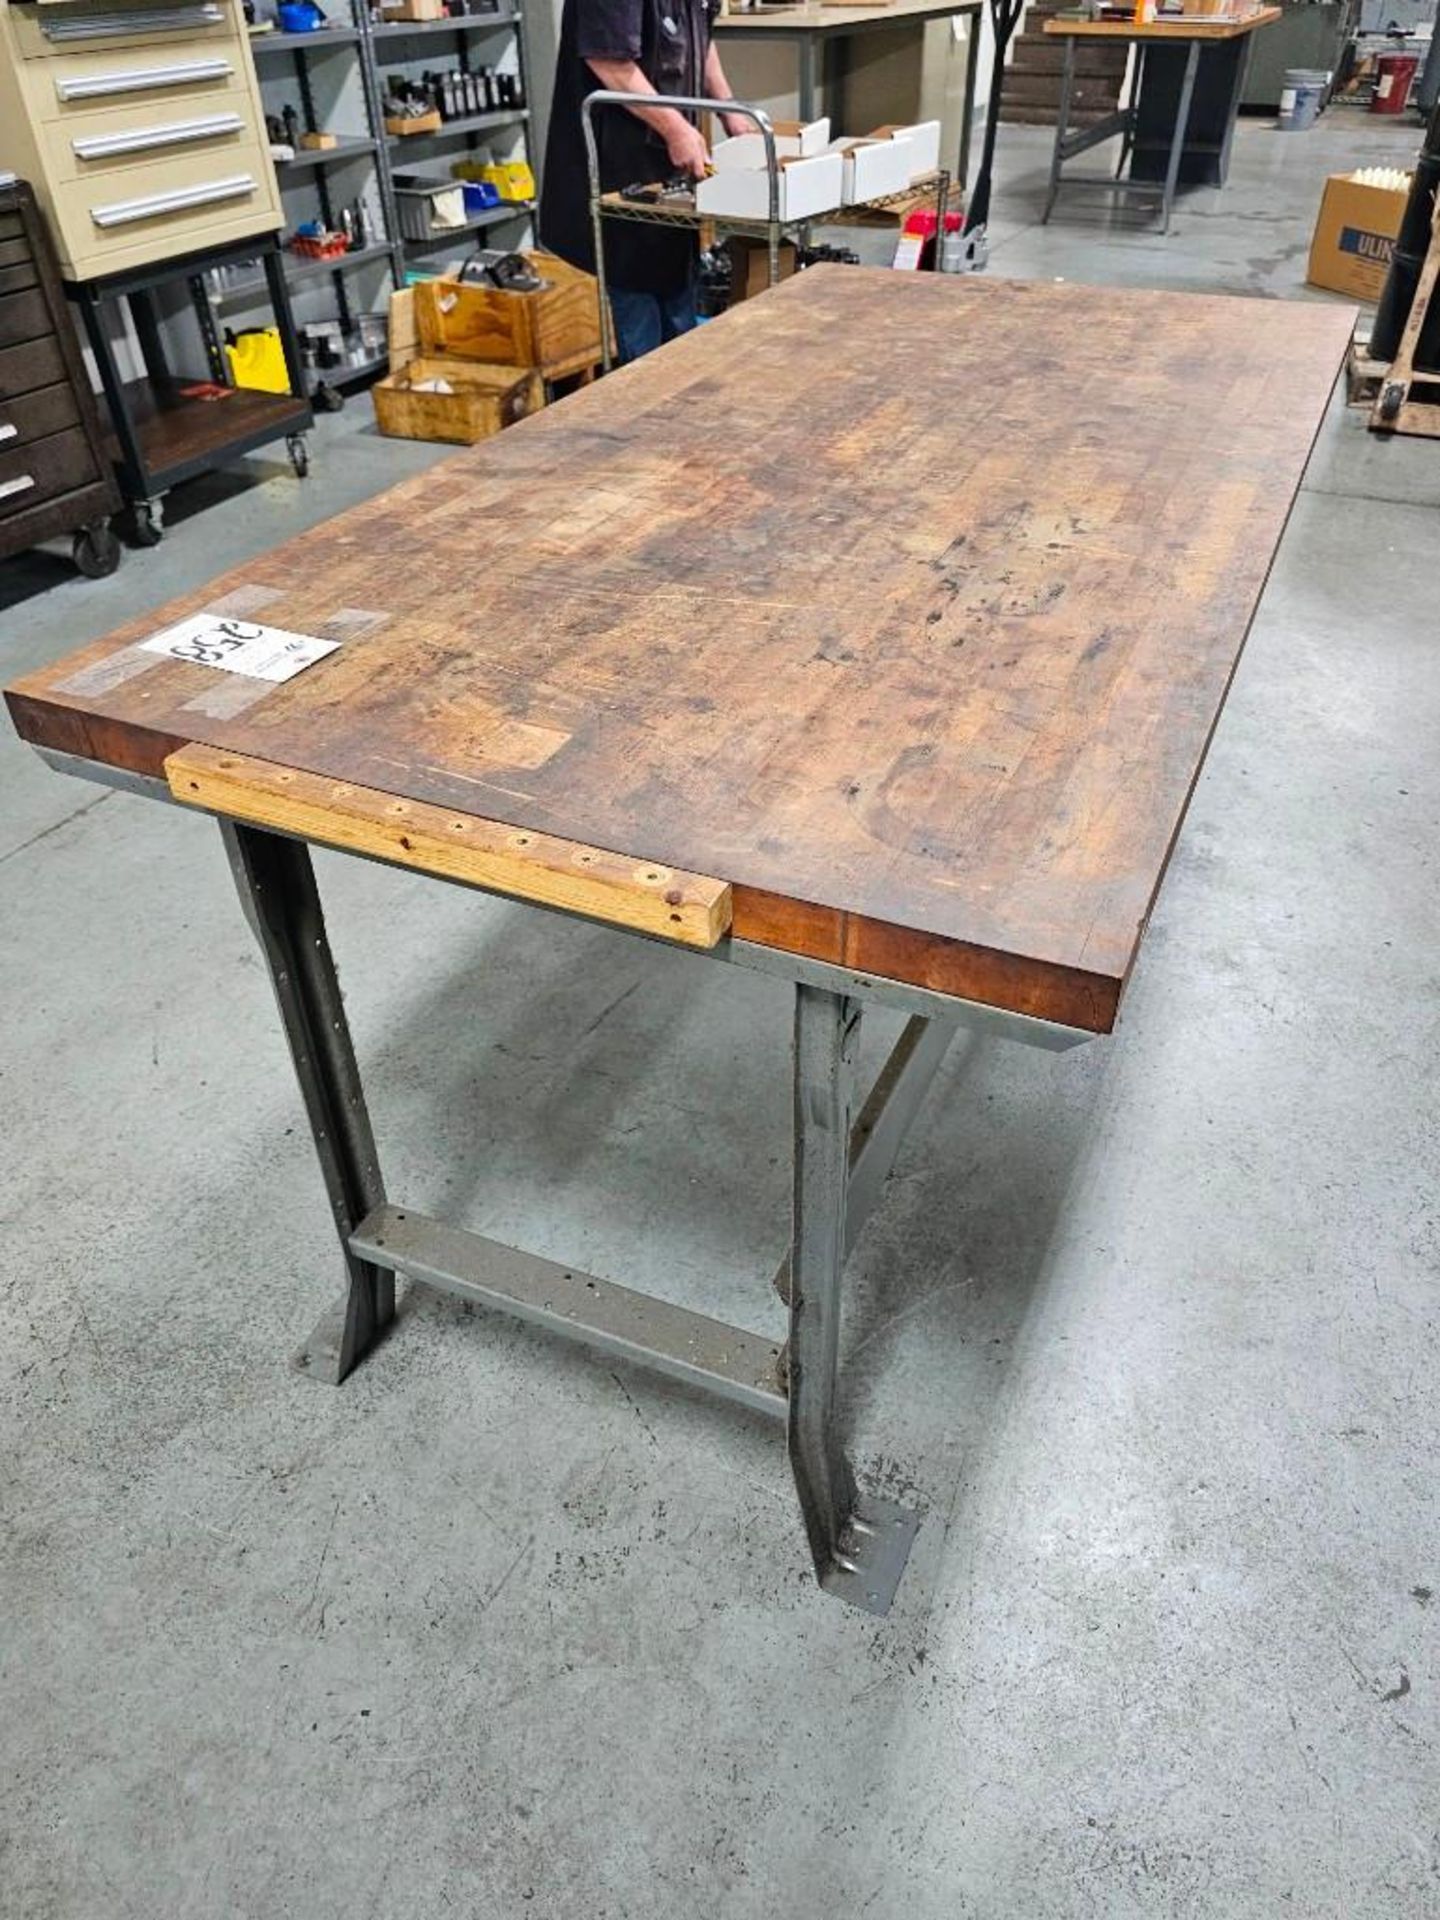 WOOD TABLE WORKBENCH WITH METAL LEGS - Image 4 of 4